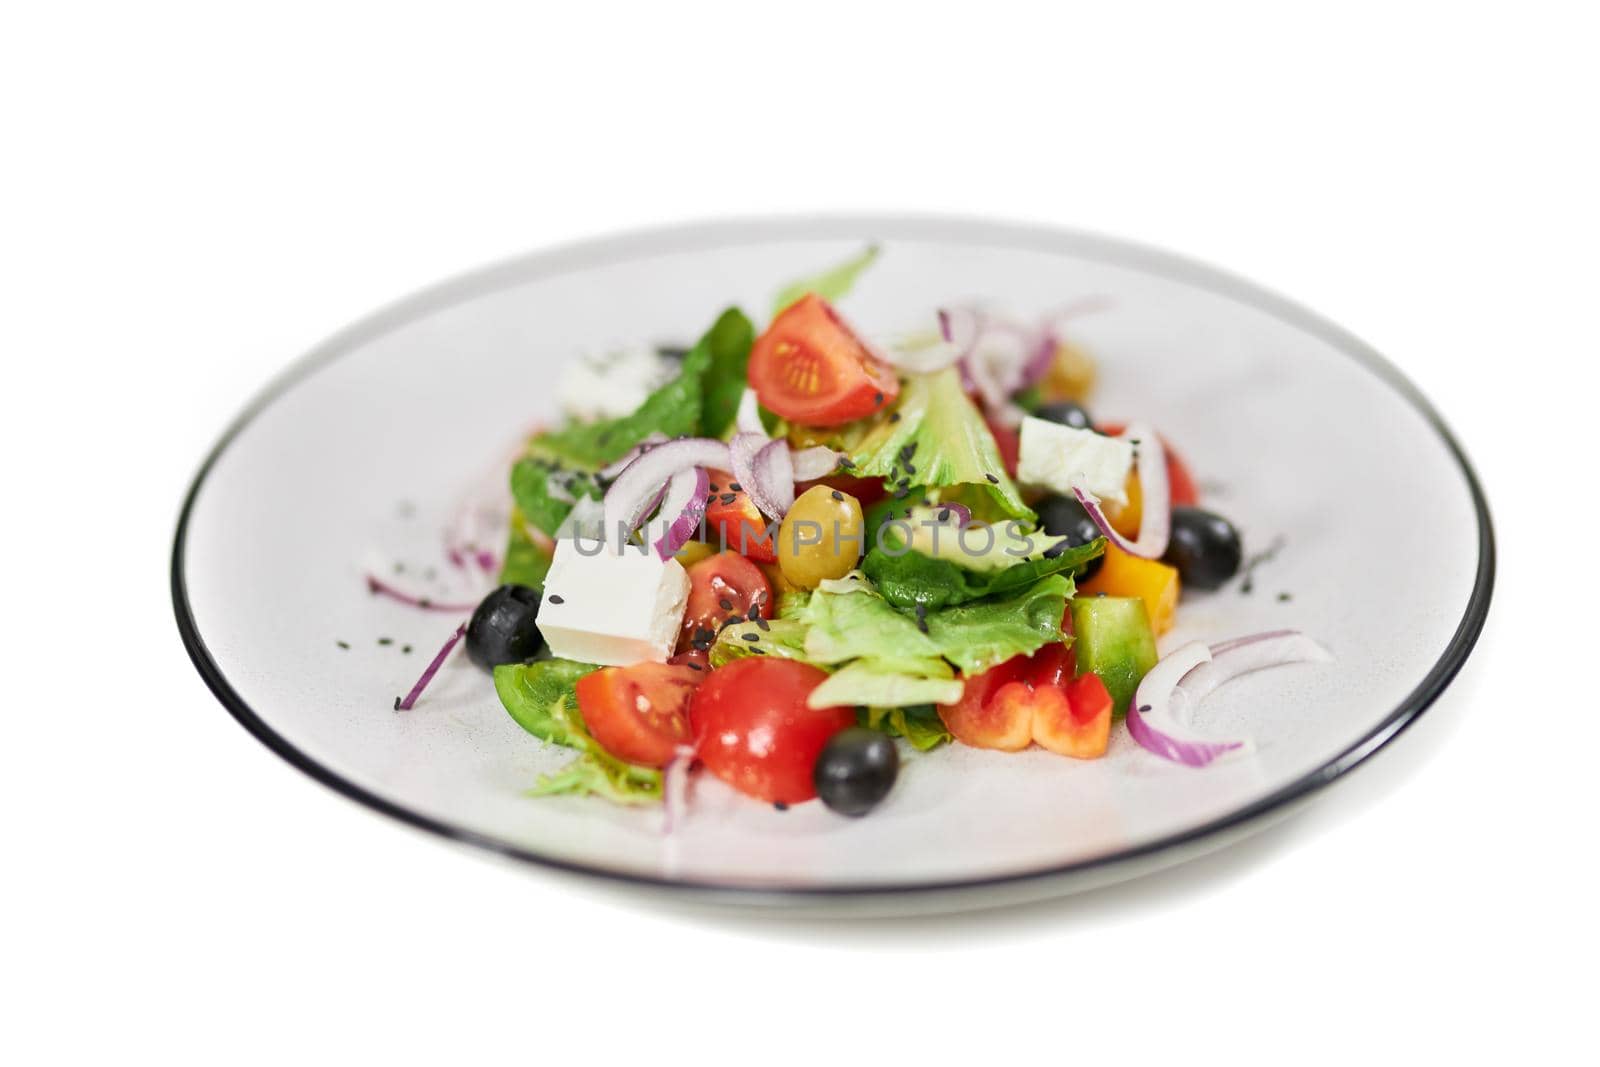 Close up of salad with tomatoes,olives, feta cheese, onion and fresh greens in white background. Concept of delicious vegetables with healthy ingredients for weight loss.